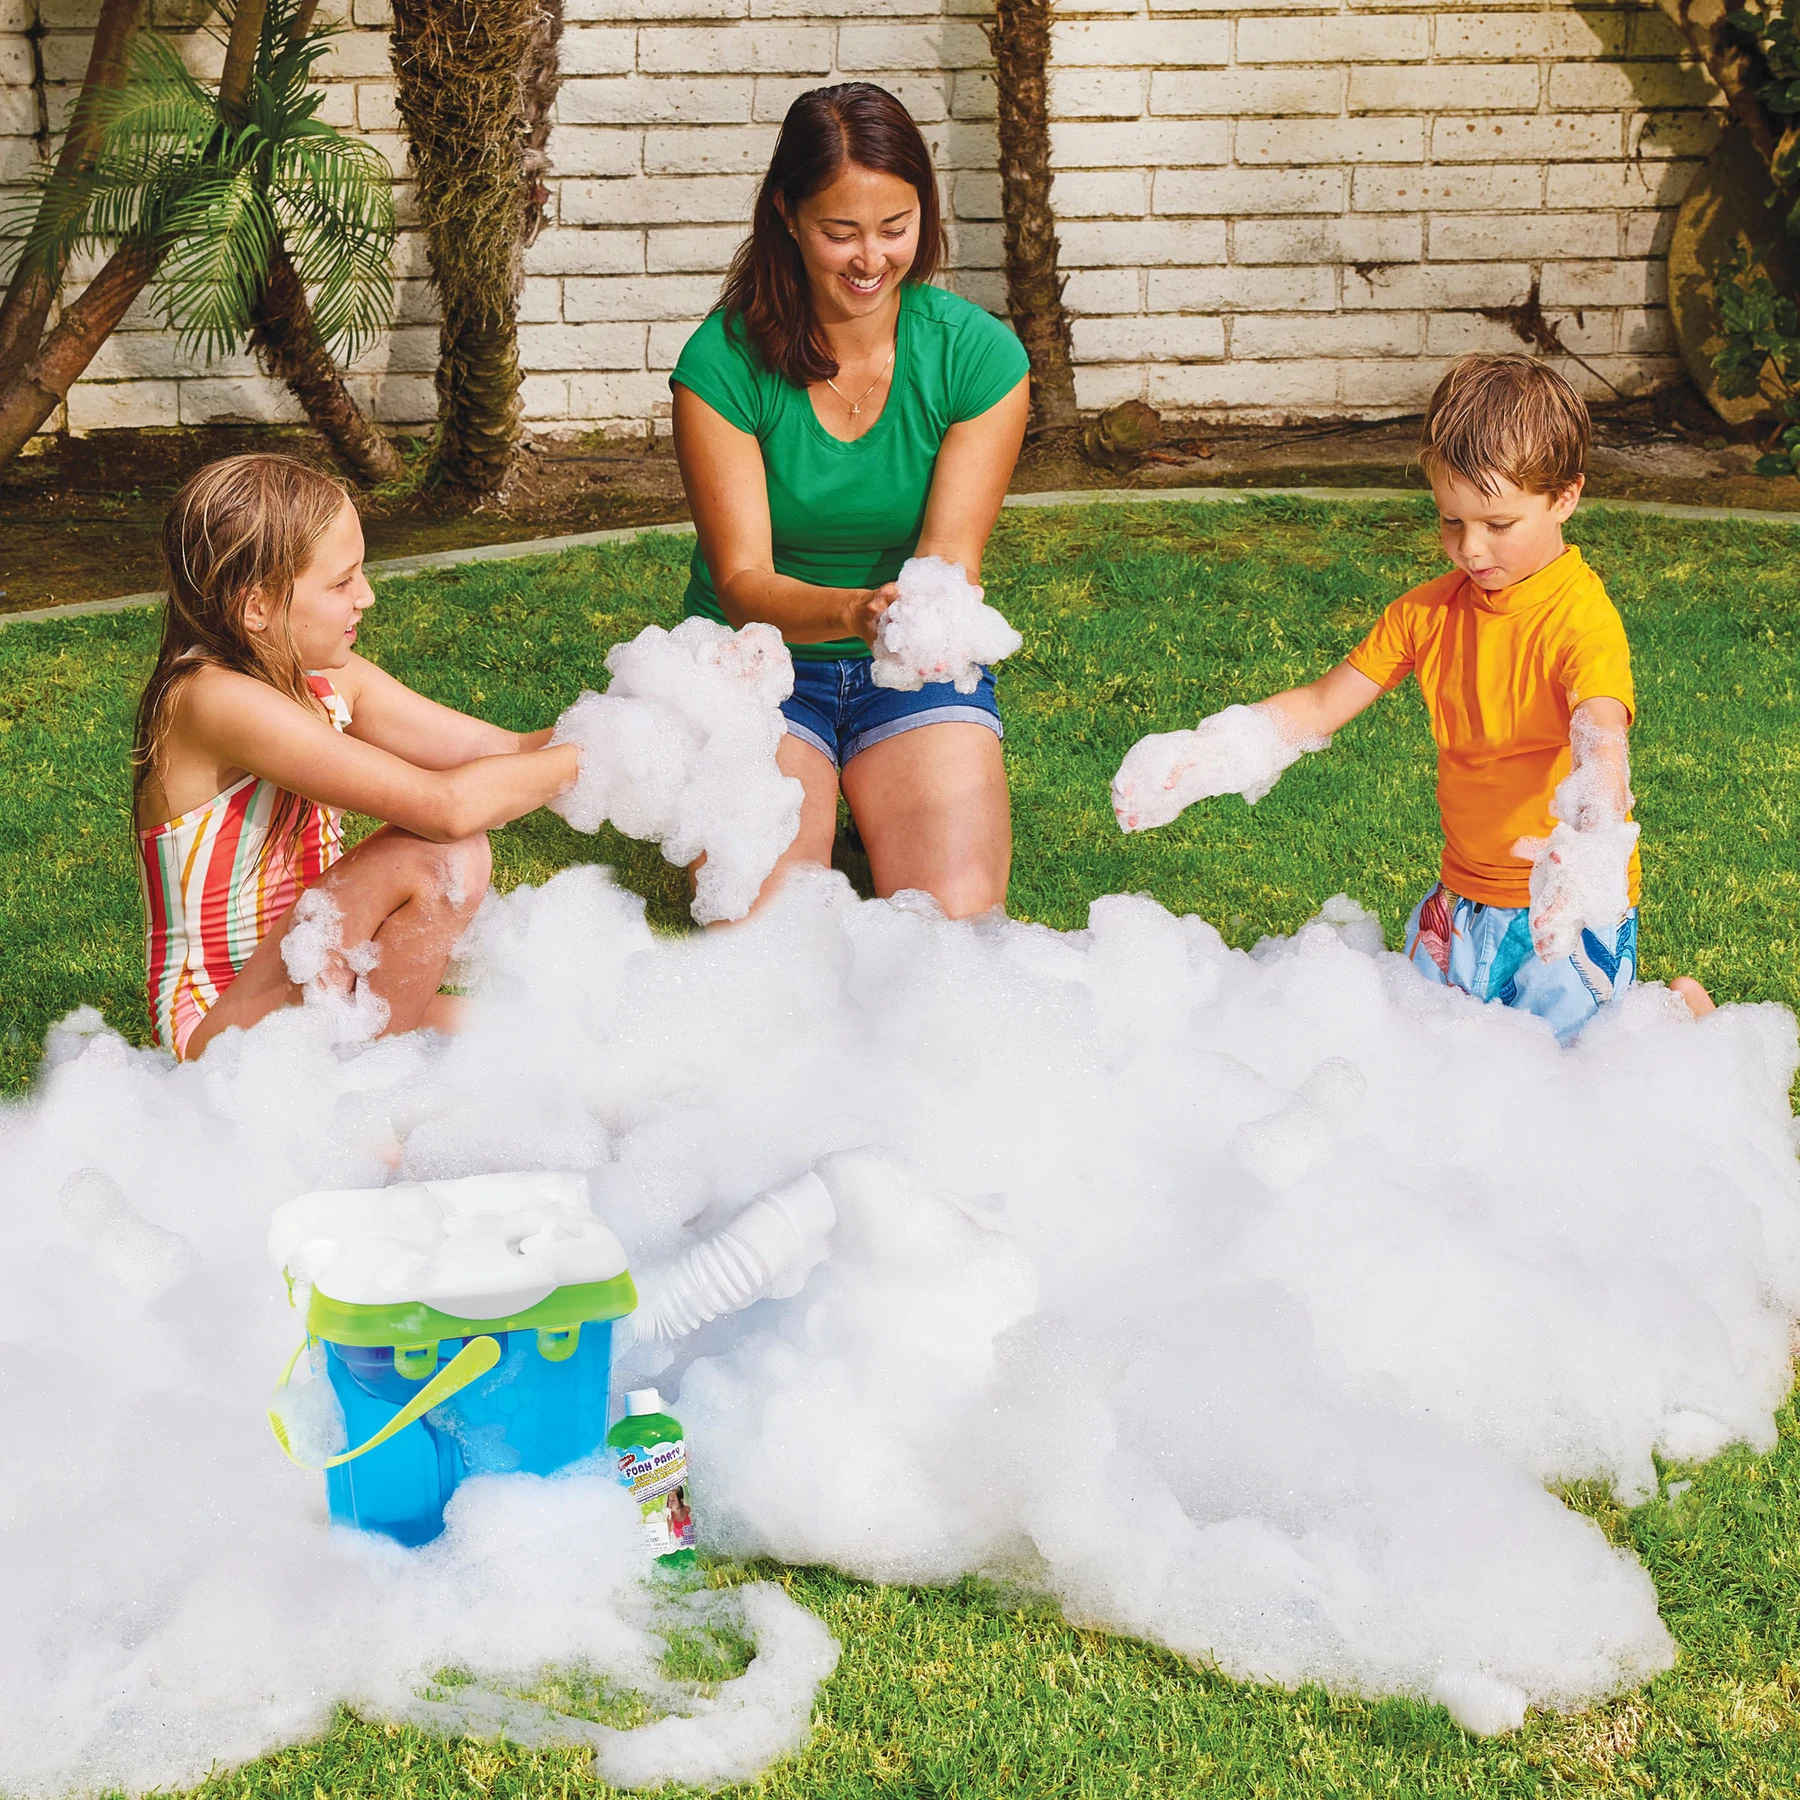 No more hose, the e-Foam Party Bucket is here!